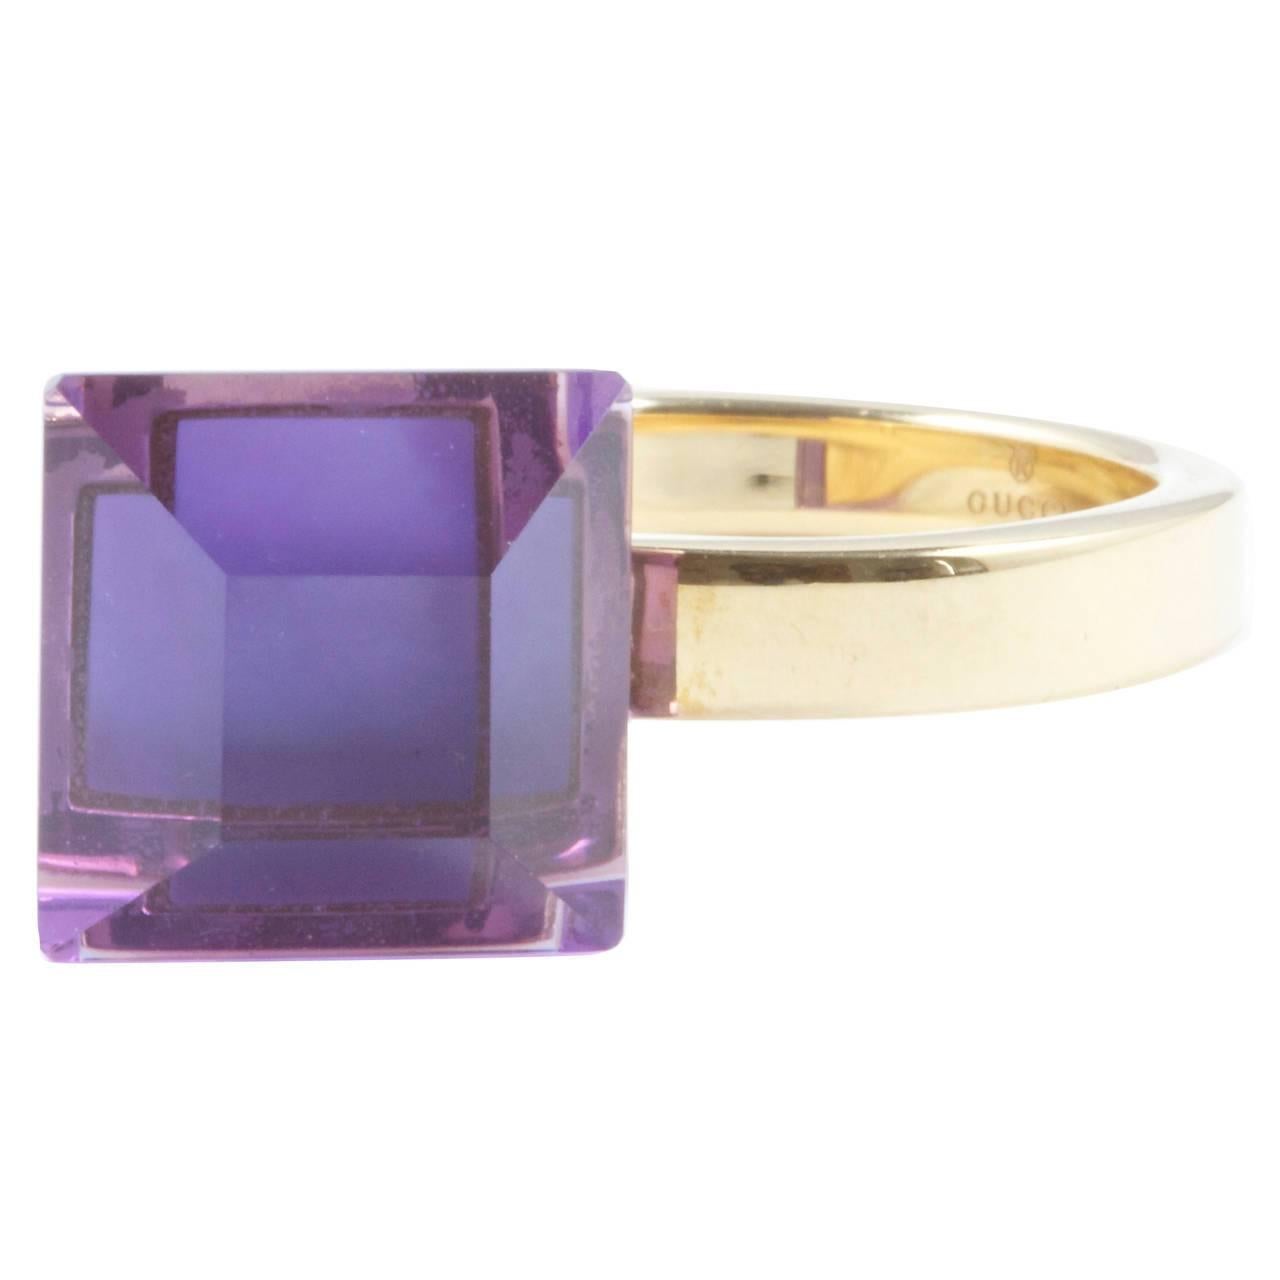 A unique stylistic ring from the fashion forward designers at Gucci. Created with a soothing purple amethyst and fine Italian 18k yellow gold. Signed Gucci and stamped made in Italy.   

Ring size 6 1/2 and can be re-sized.